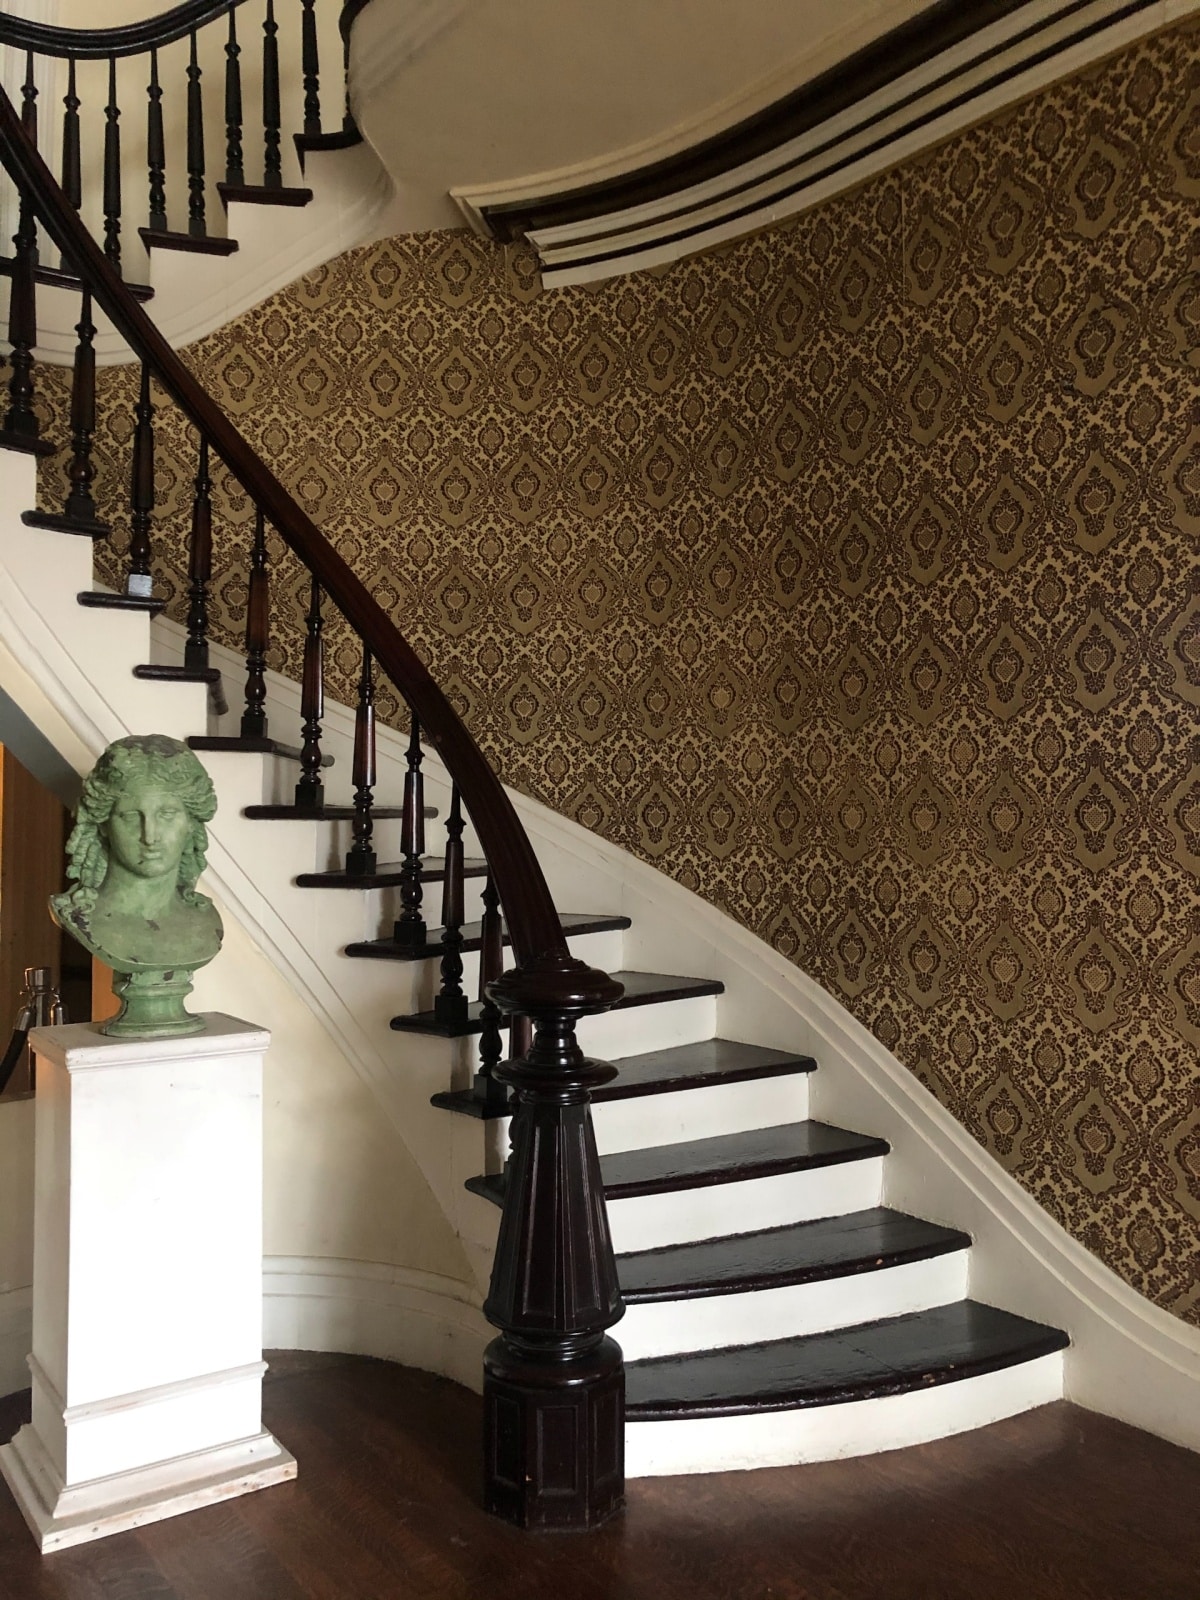 black and white curved staircase with a wallpaper backdrop